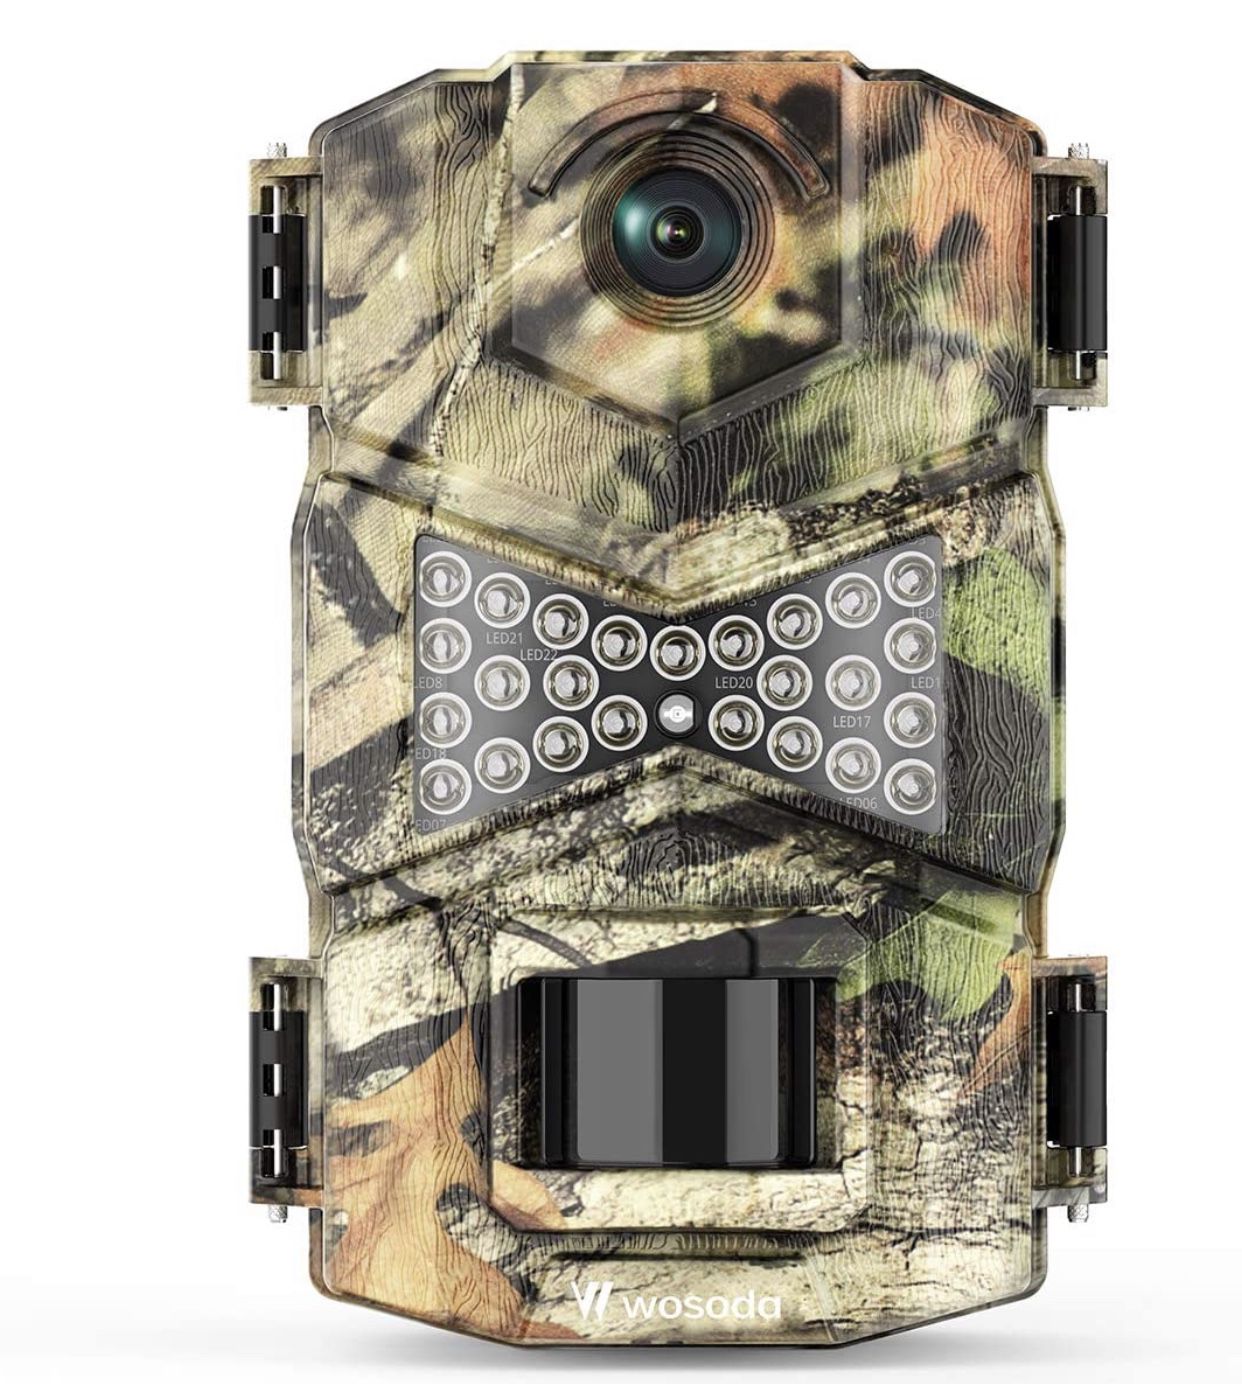 Trail Camera, Waterproof 16MP 1080P Hunting Game Camera, Wildlife Camera with Upgraded 850nm IR LEDs Night Vision 260ft, 2.0''LCD for Home Security W